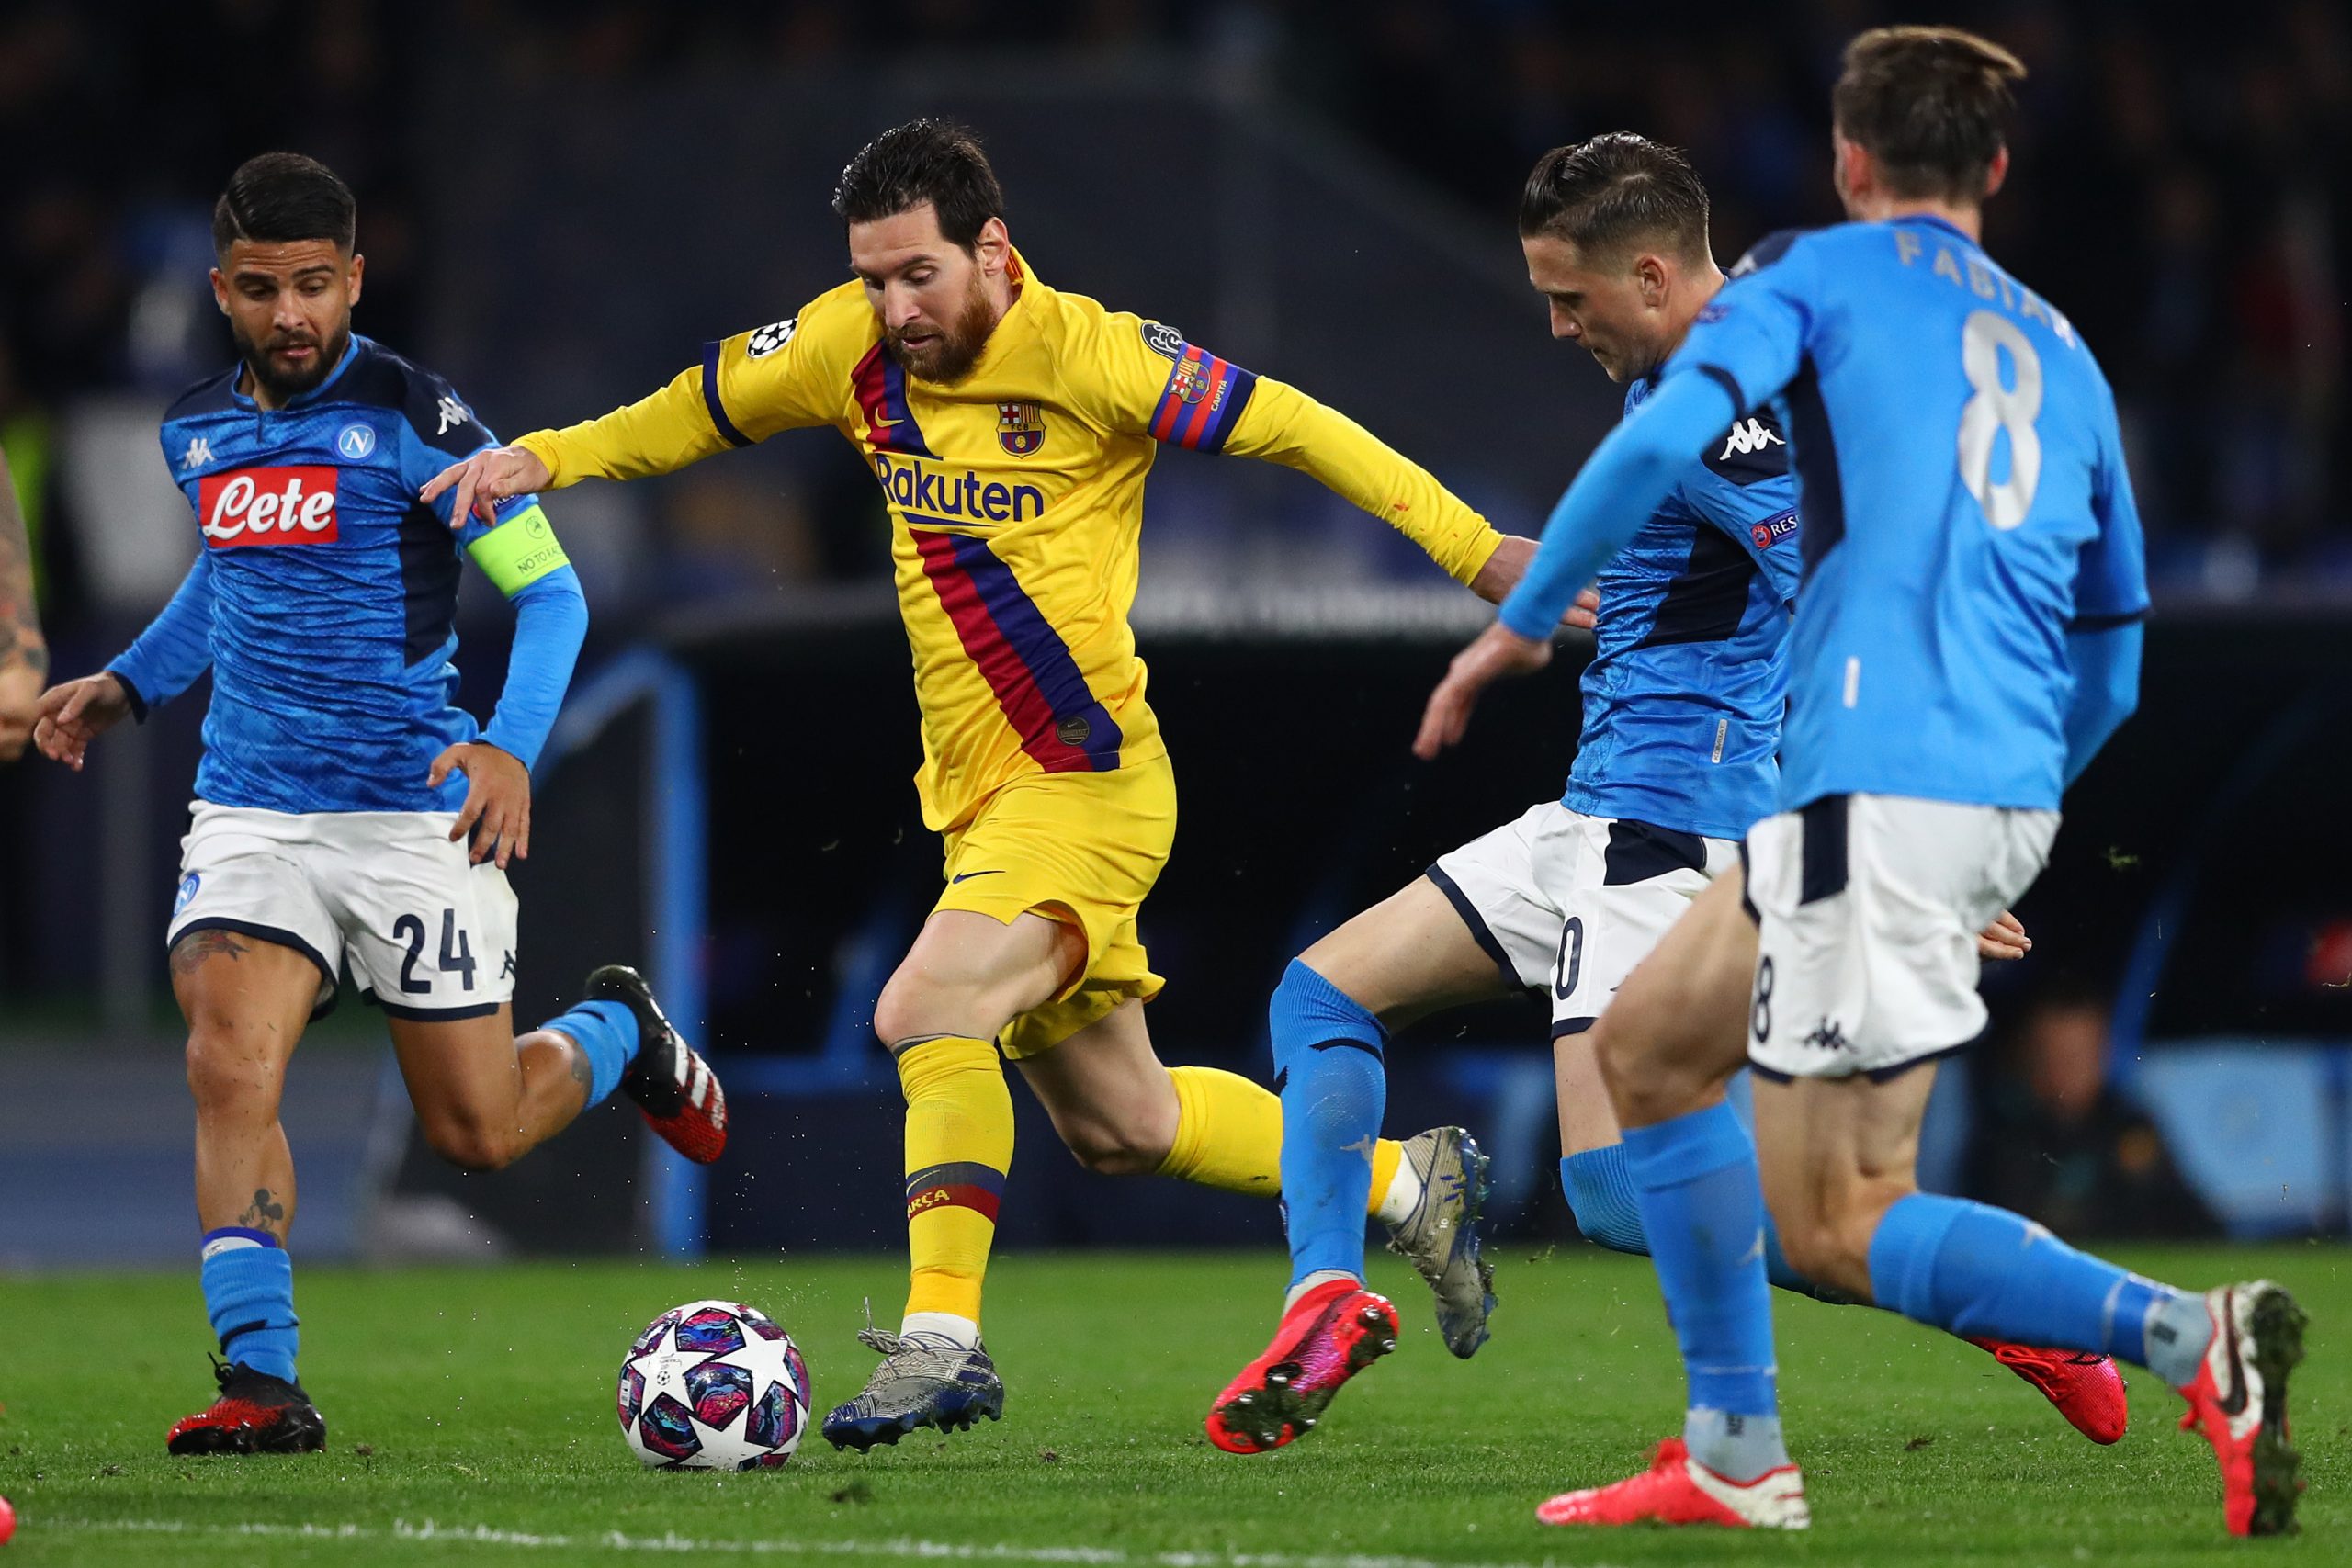 Manchester City set to intensify their efforts for Barcelona's Messi who is in action in the photo